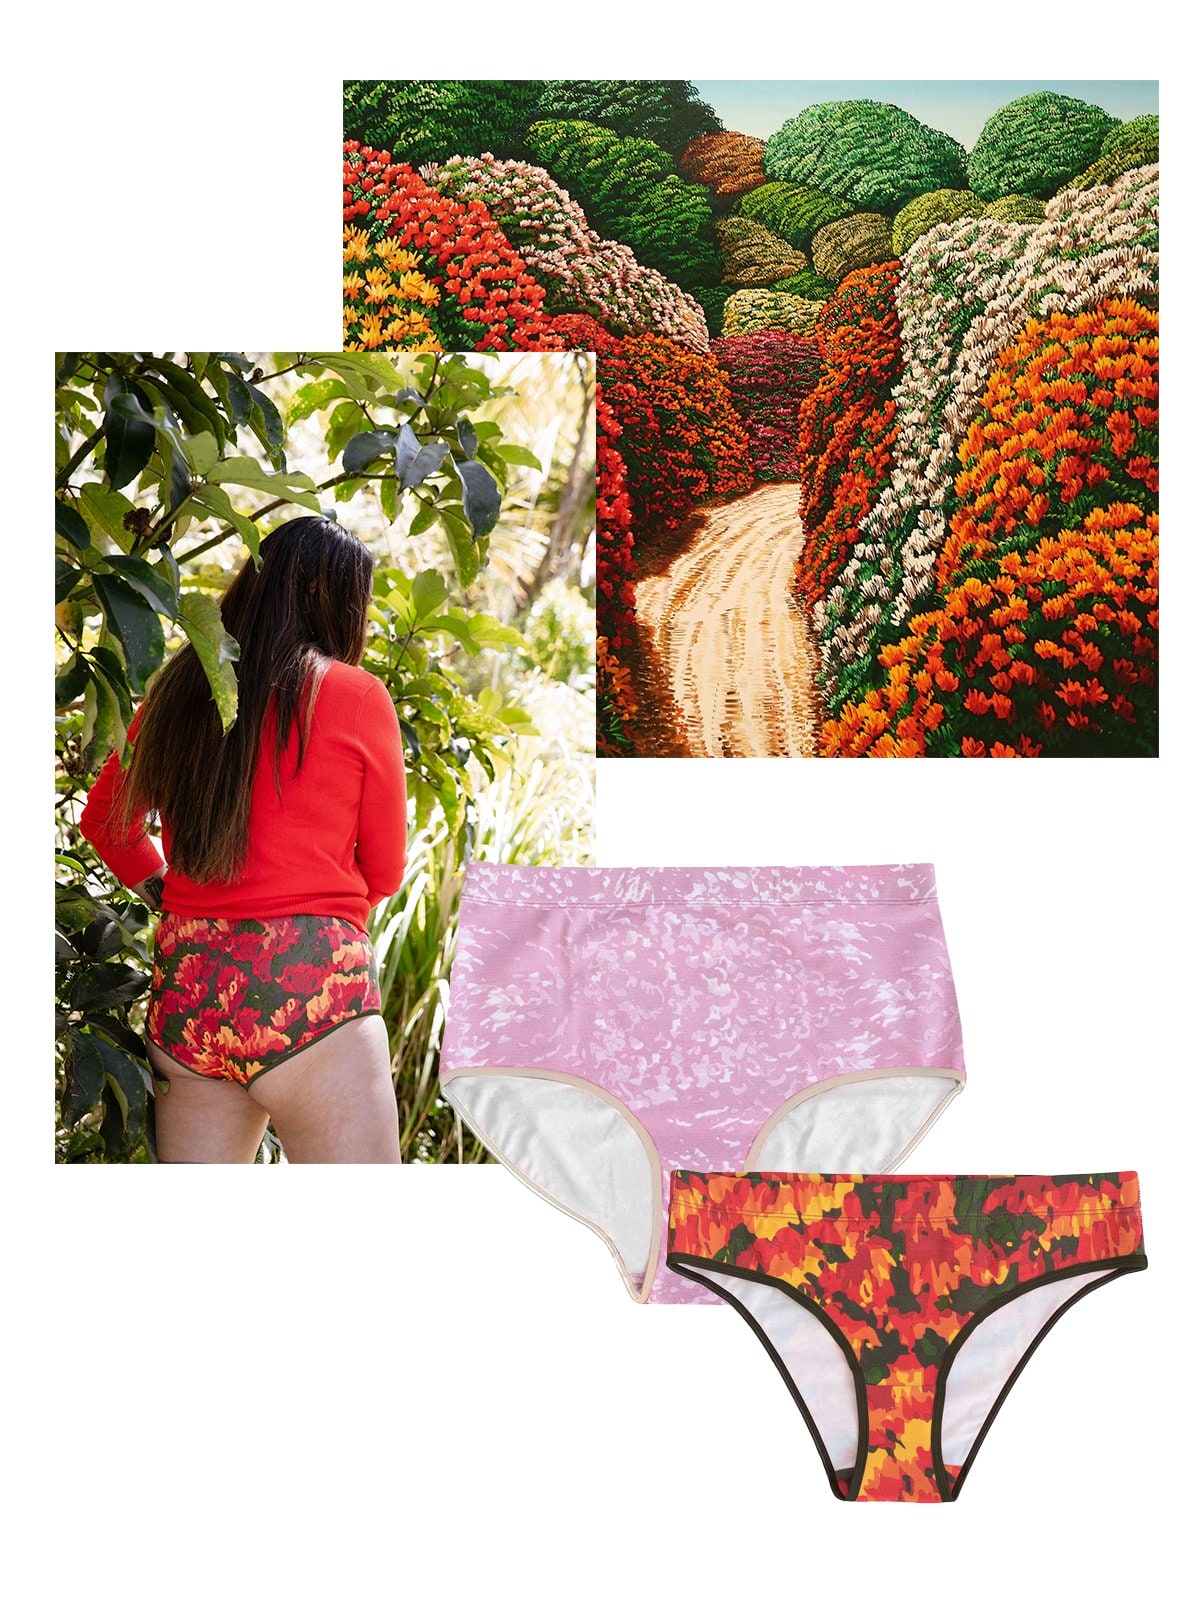 A collage of a floral painting by artist by Karl Maughan, a woman wearing Robyn's Undies knickers and two Robyn's Undies colours 